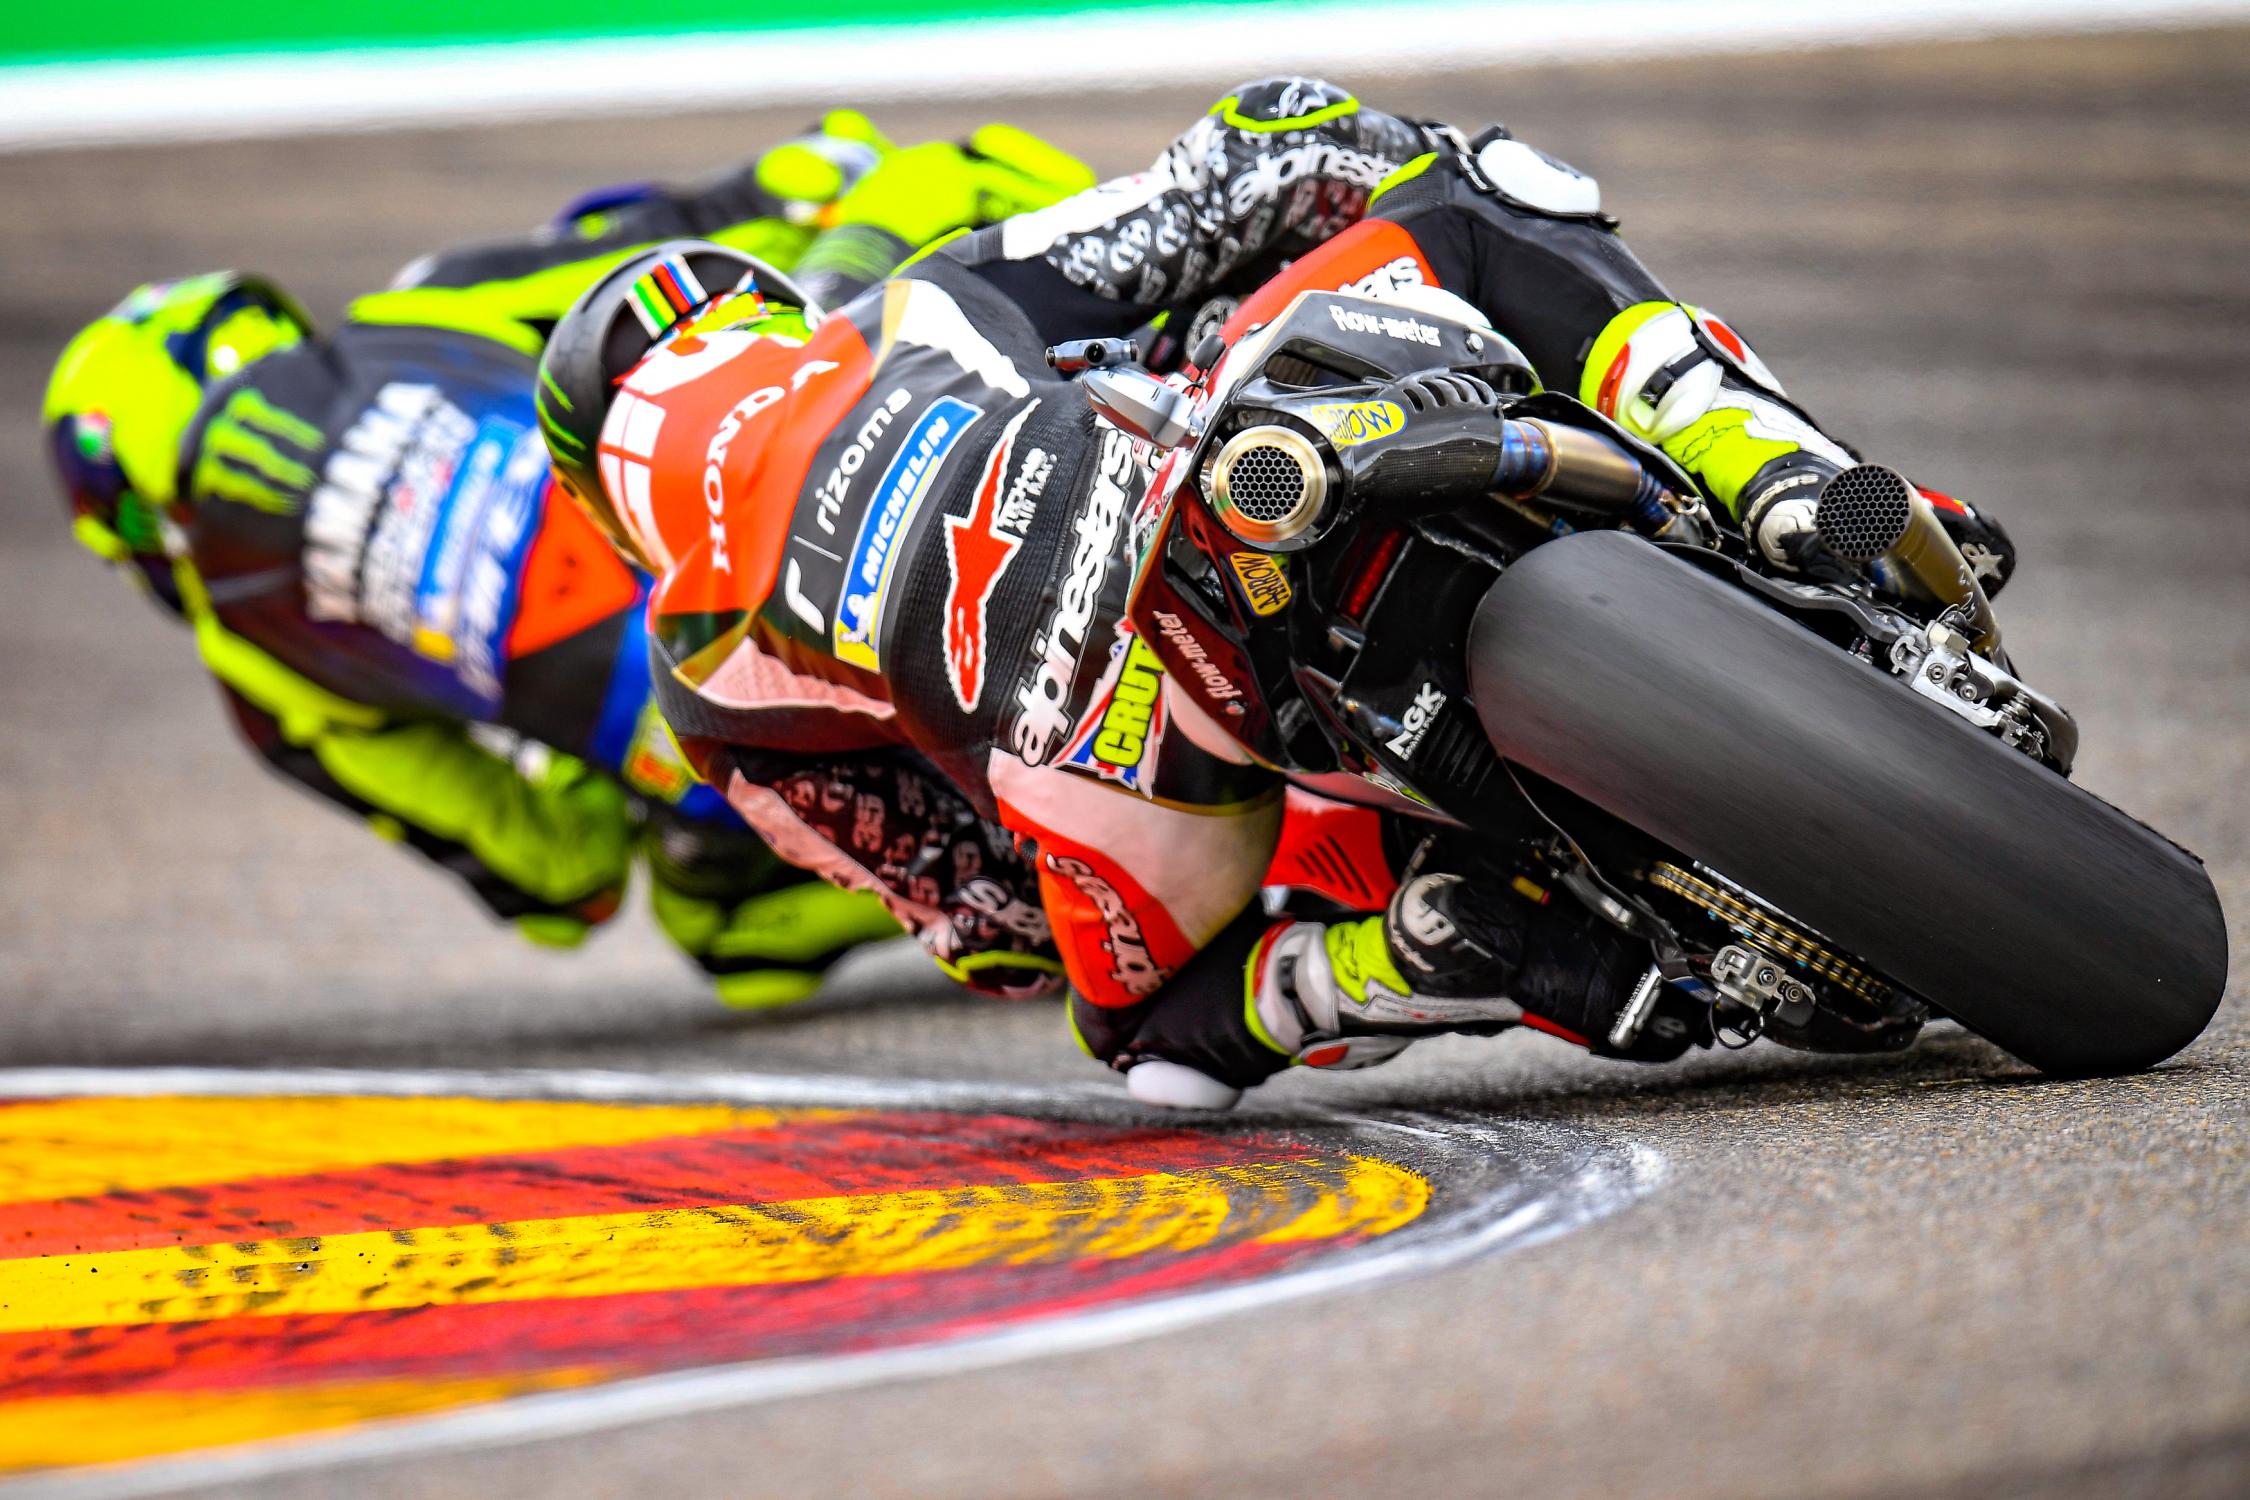 Solid 6th for Crutchlow in Aragon